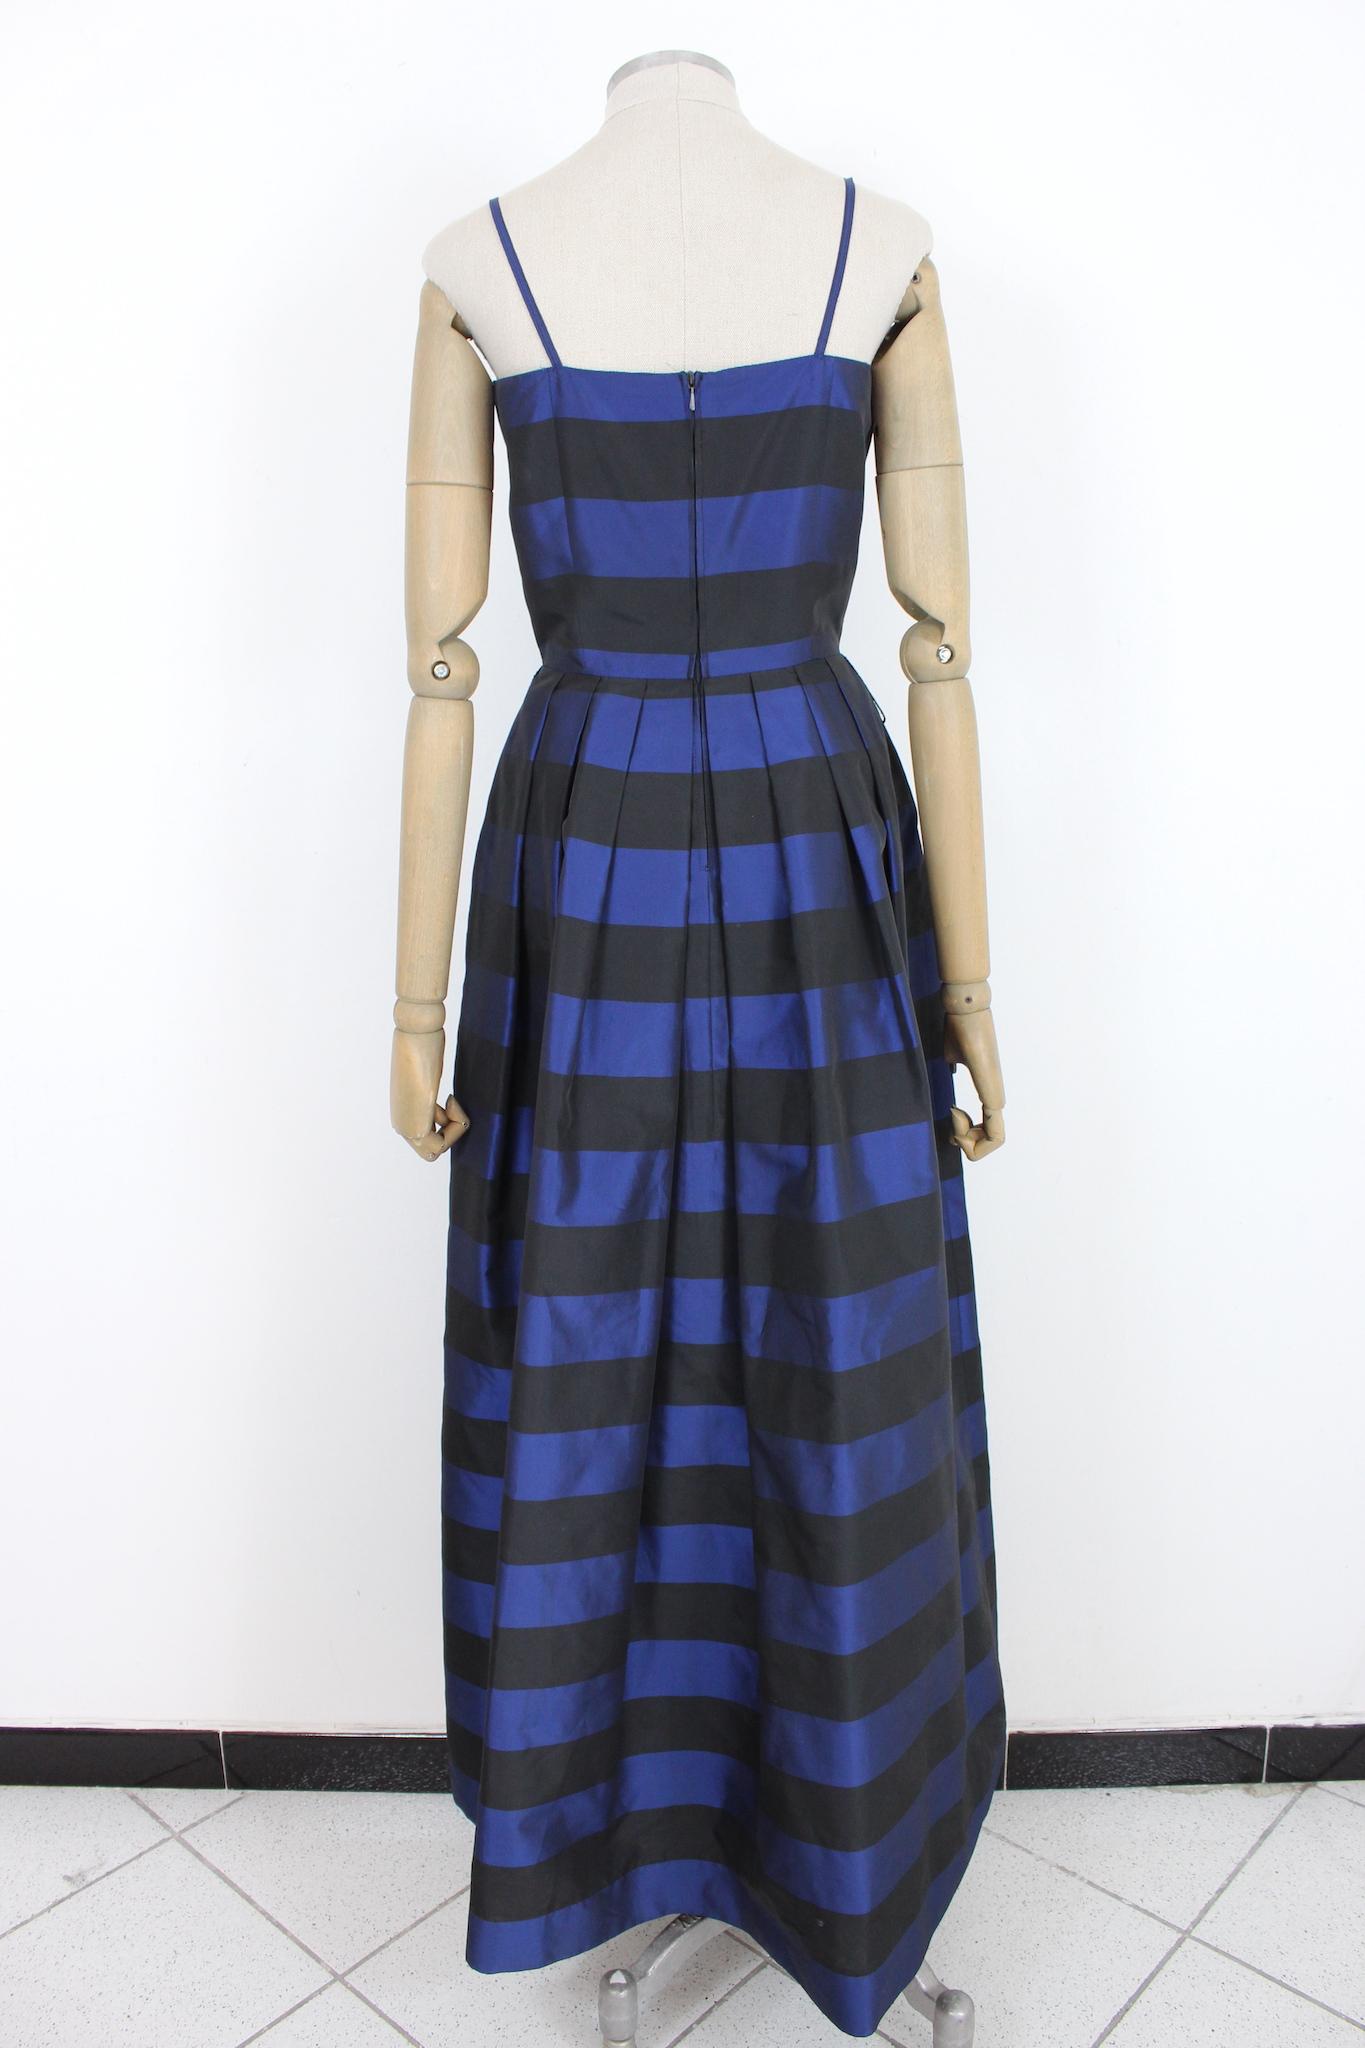 Yvette Paris long evening dress from the 70s. Striped blue and black color, long princely model. Her dress has a fitted bodice with minimal straps, while the skirt is very voluminous with petticoat. Made in France.

Size 42 It 8 Us 10